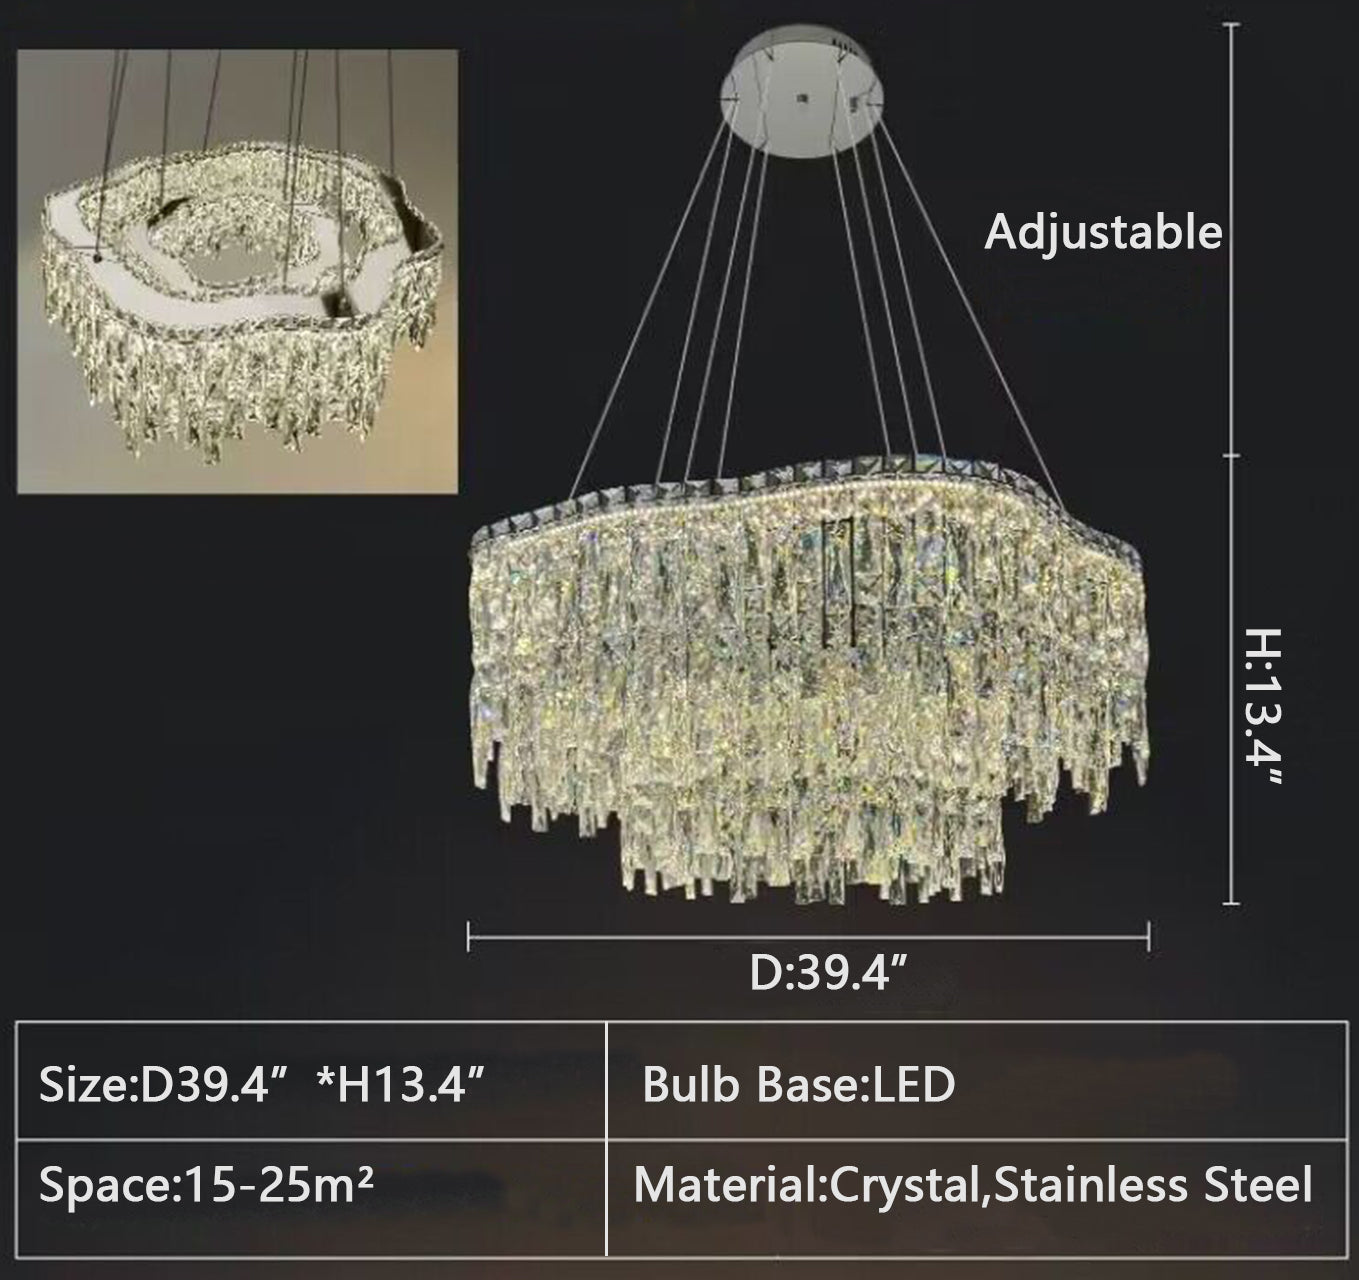 2Layer: D39.4"*H13.4" chandelier,chandeliers,pendant,rods,crystal,metal,stainless steel,clound,rectangle,oval,round,rings,ceiling,kitchen island,kitchen bar,bar,dinng table,dining bar,living room,bedroom,bathroom,home office